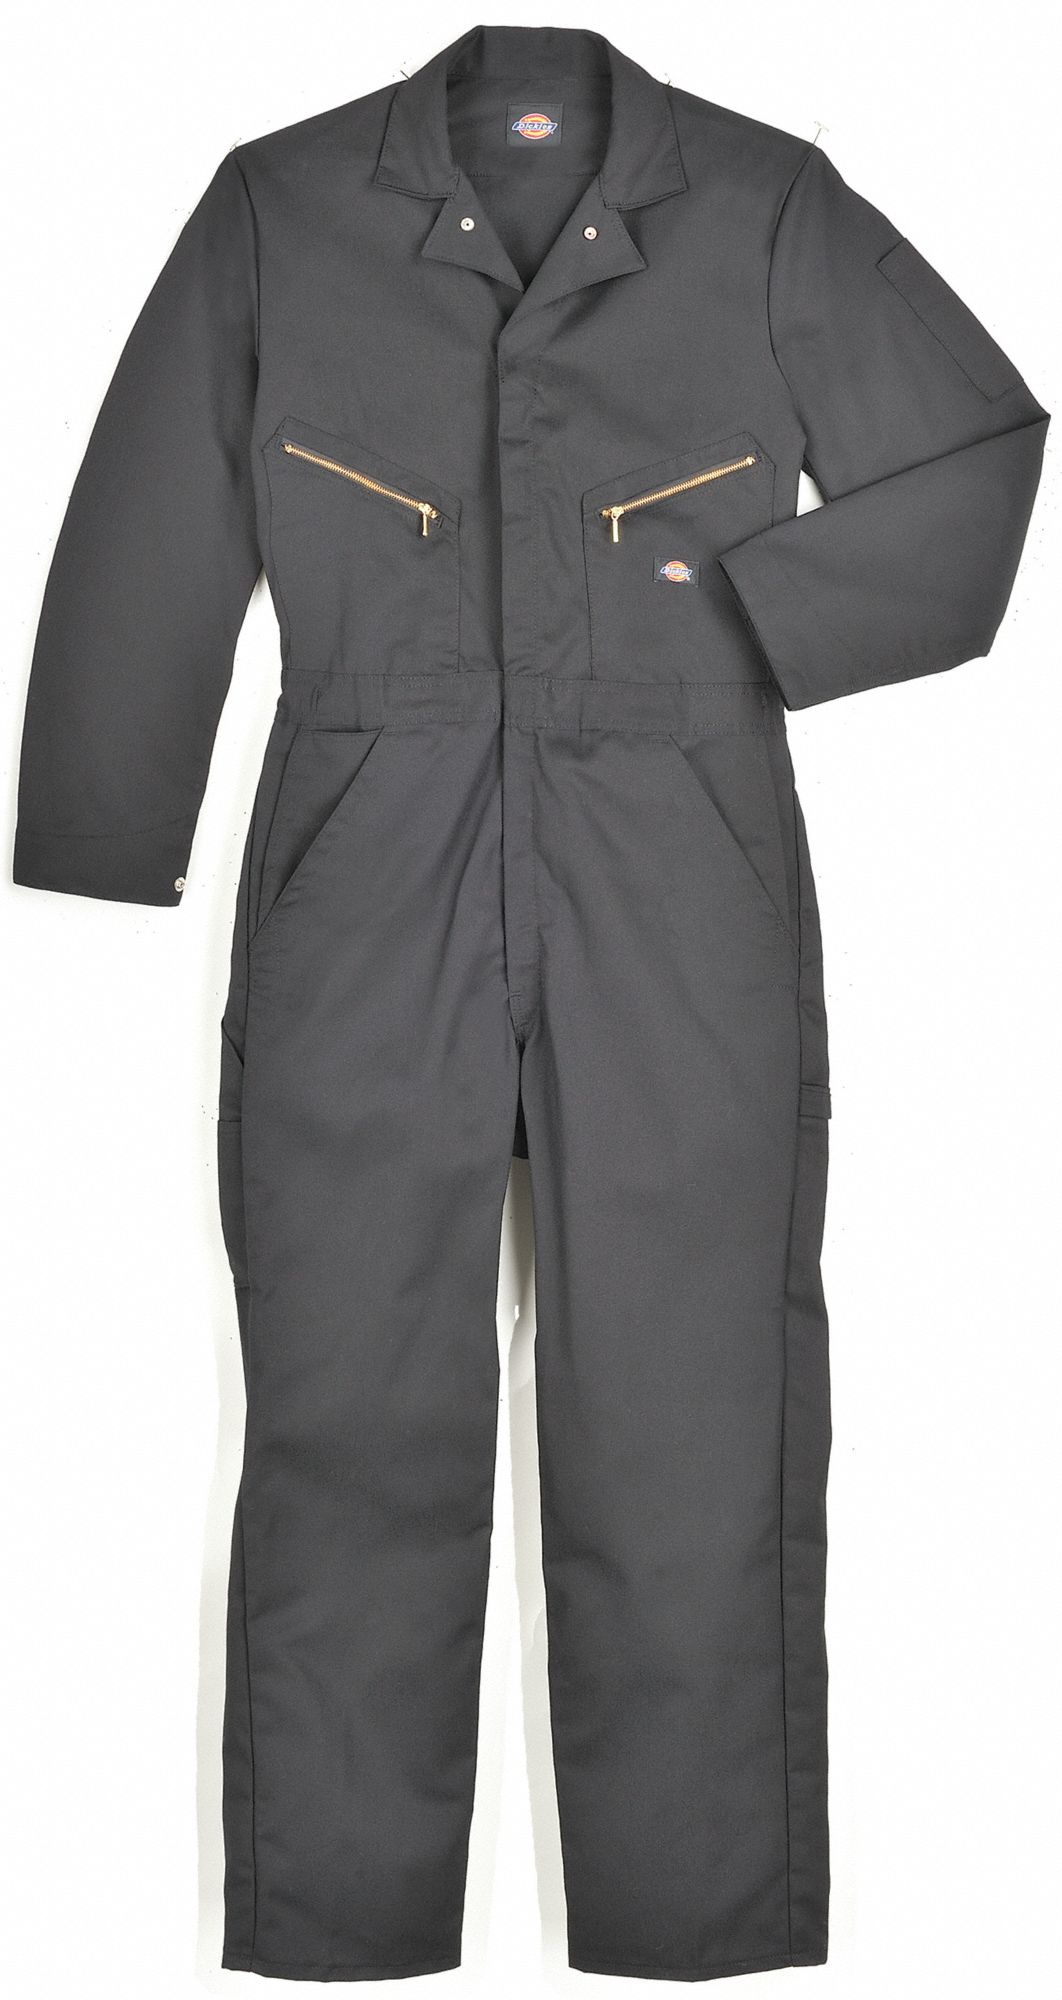 Coveralls At Tractor Supply - www.inf-inet.com